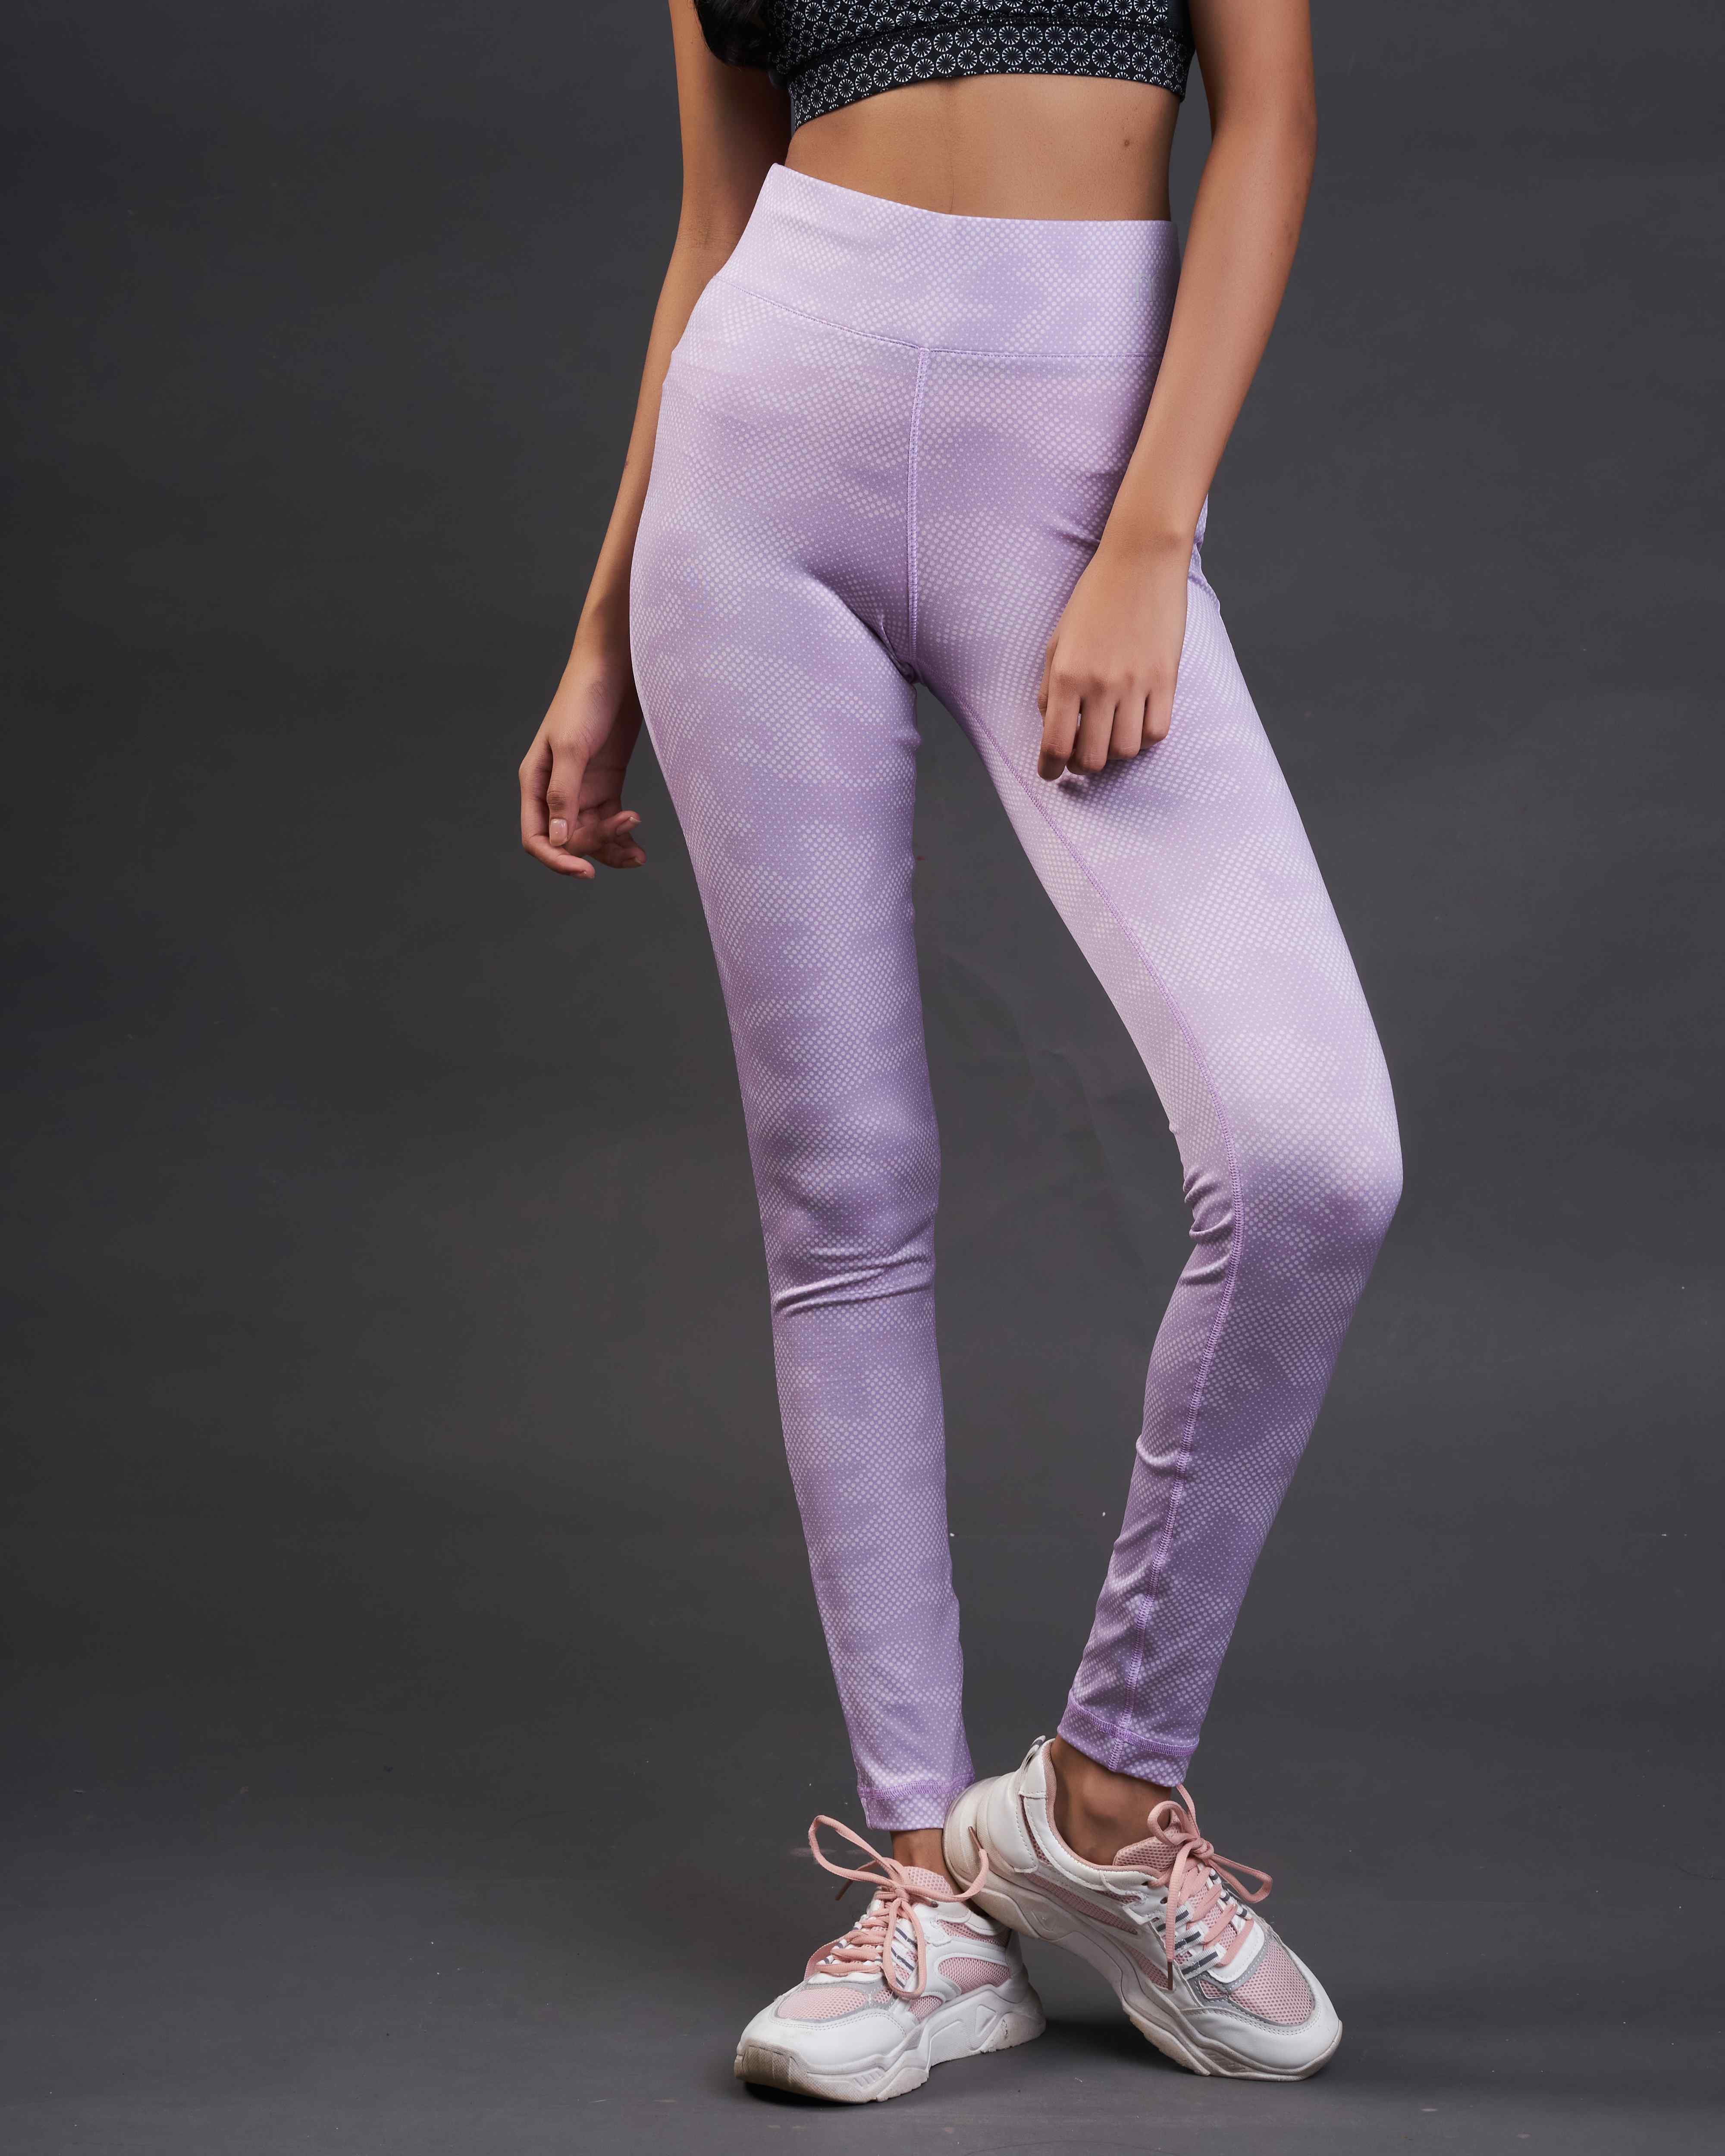 Runn Active Wear Printed Athleisure Fit-Lilac